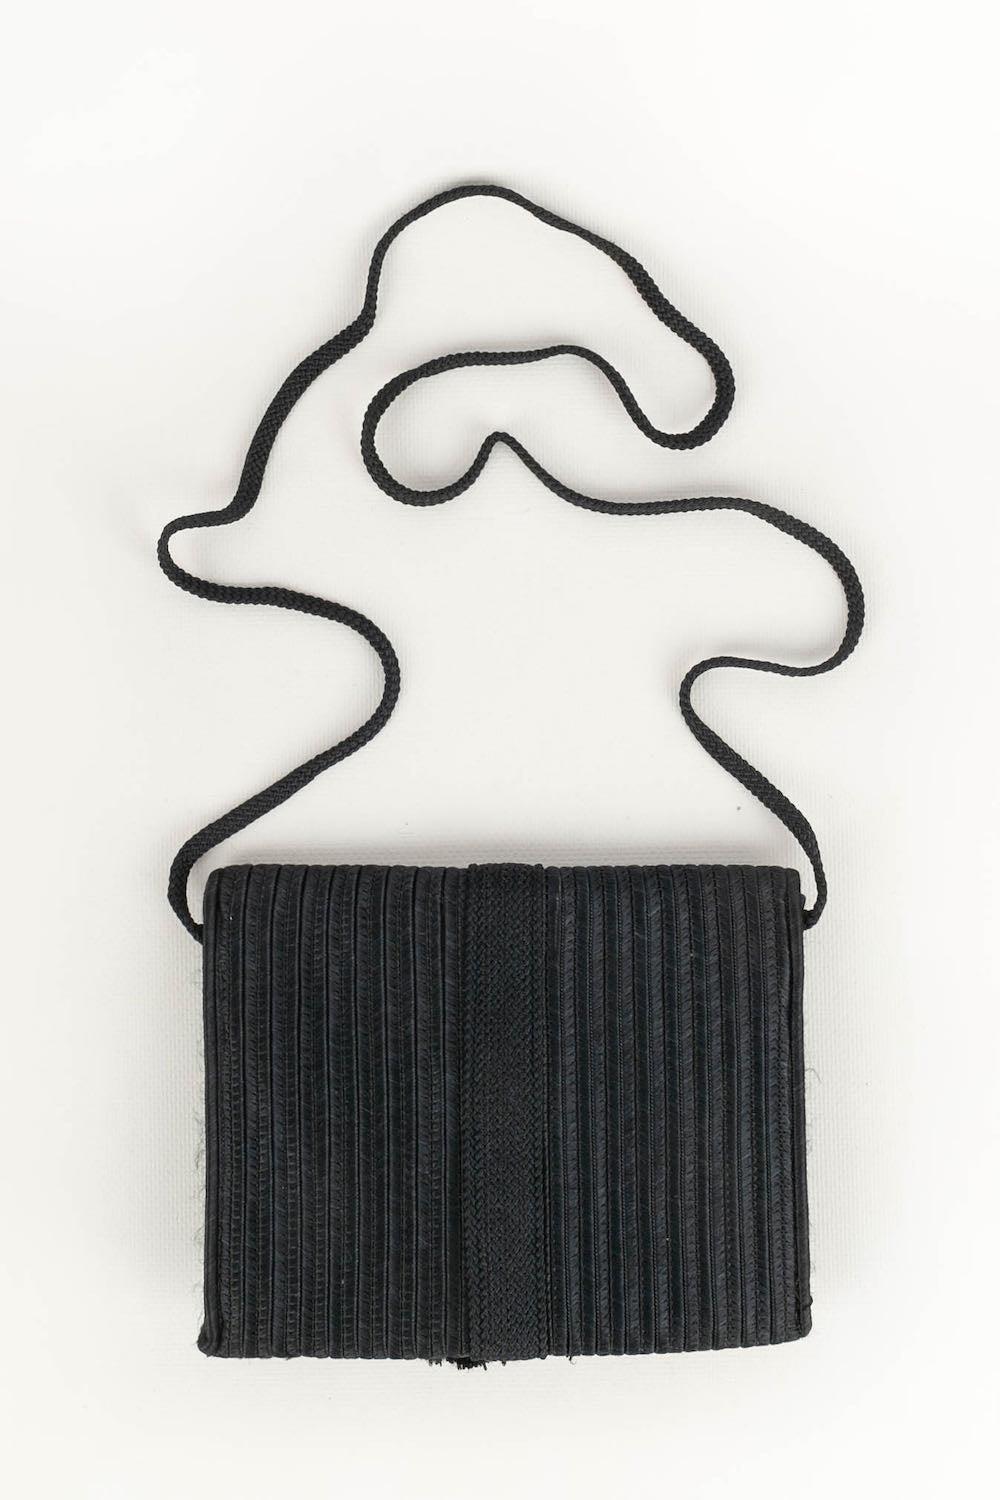 Nina Ricci - Evening bag in black passementerie.

Additional information: 
Dimensions: Height: 15 cm, Width: 18 cm, Handle: 110 cm
Condition: Very good condition
Seller Ref number: S119
